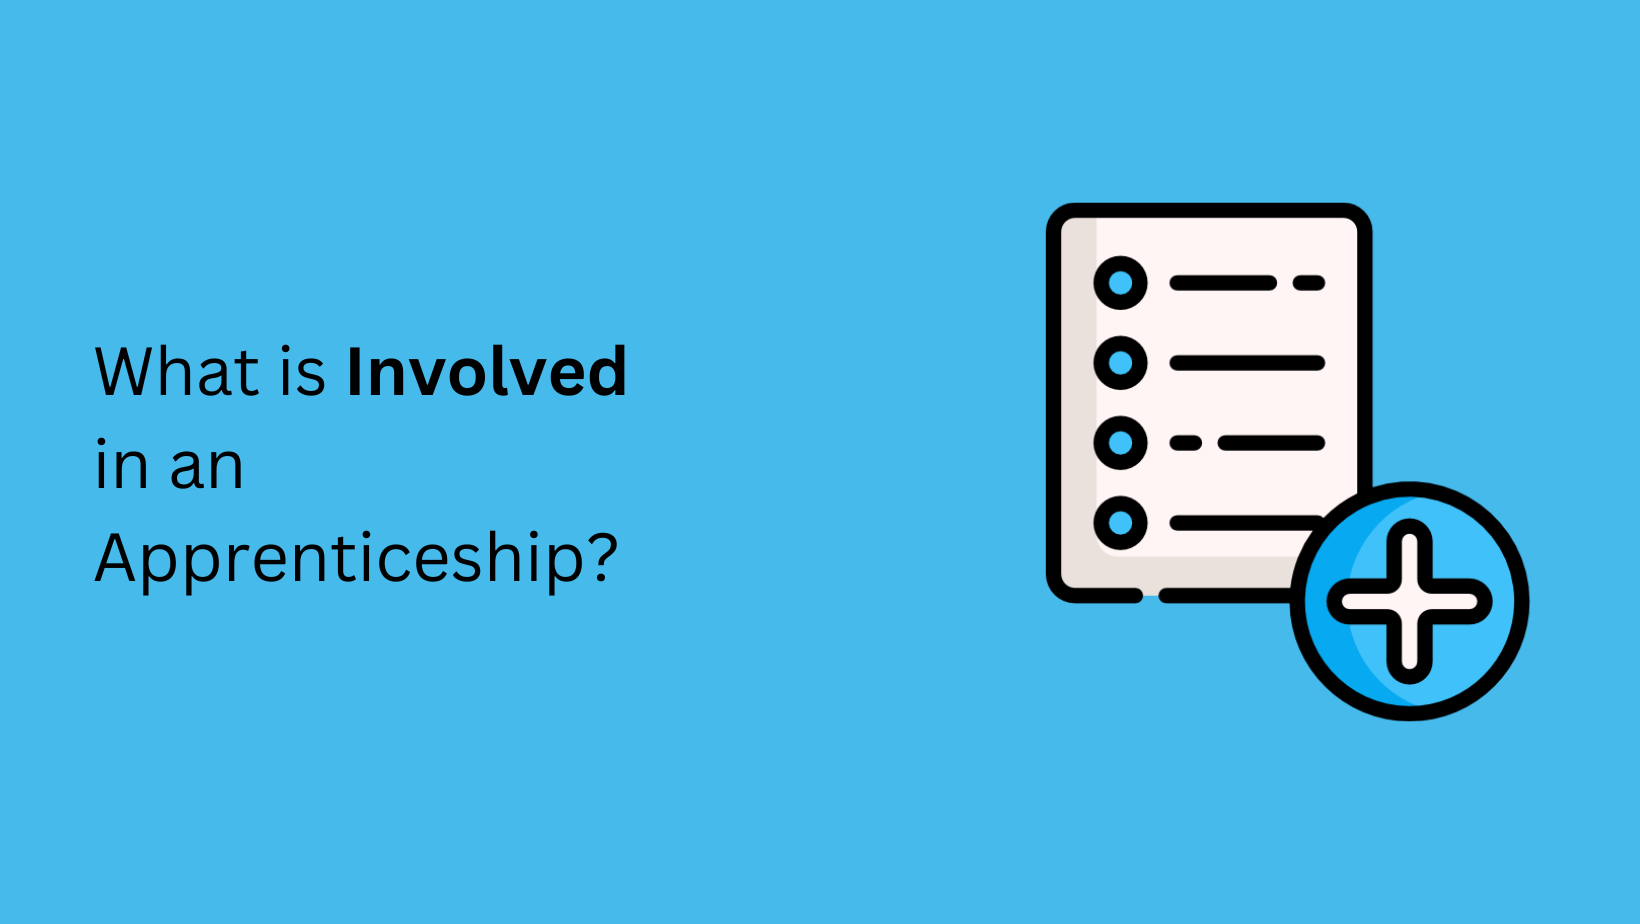 What is Involved in an Apprenticeship